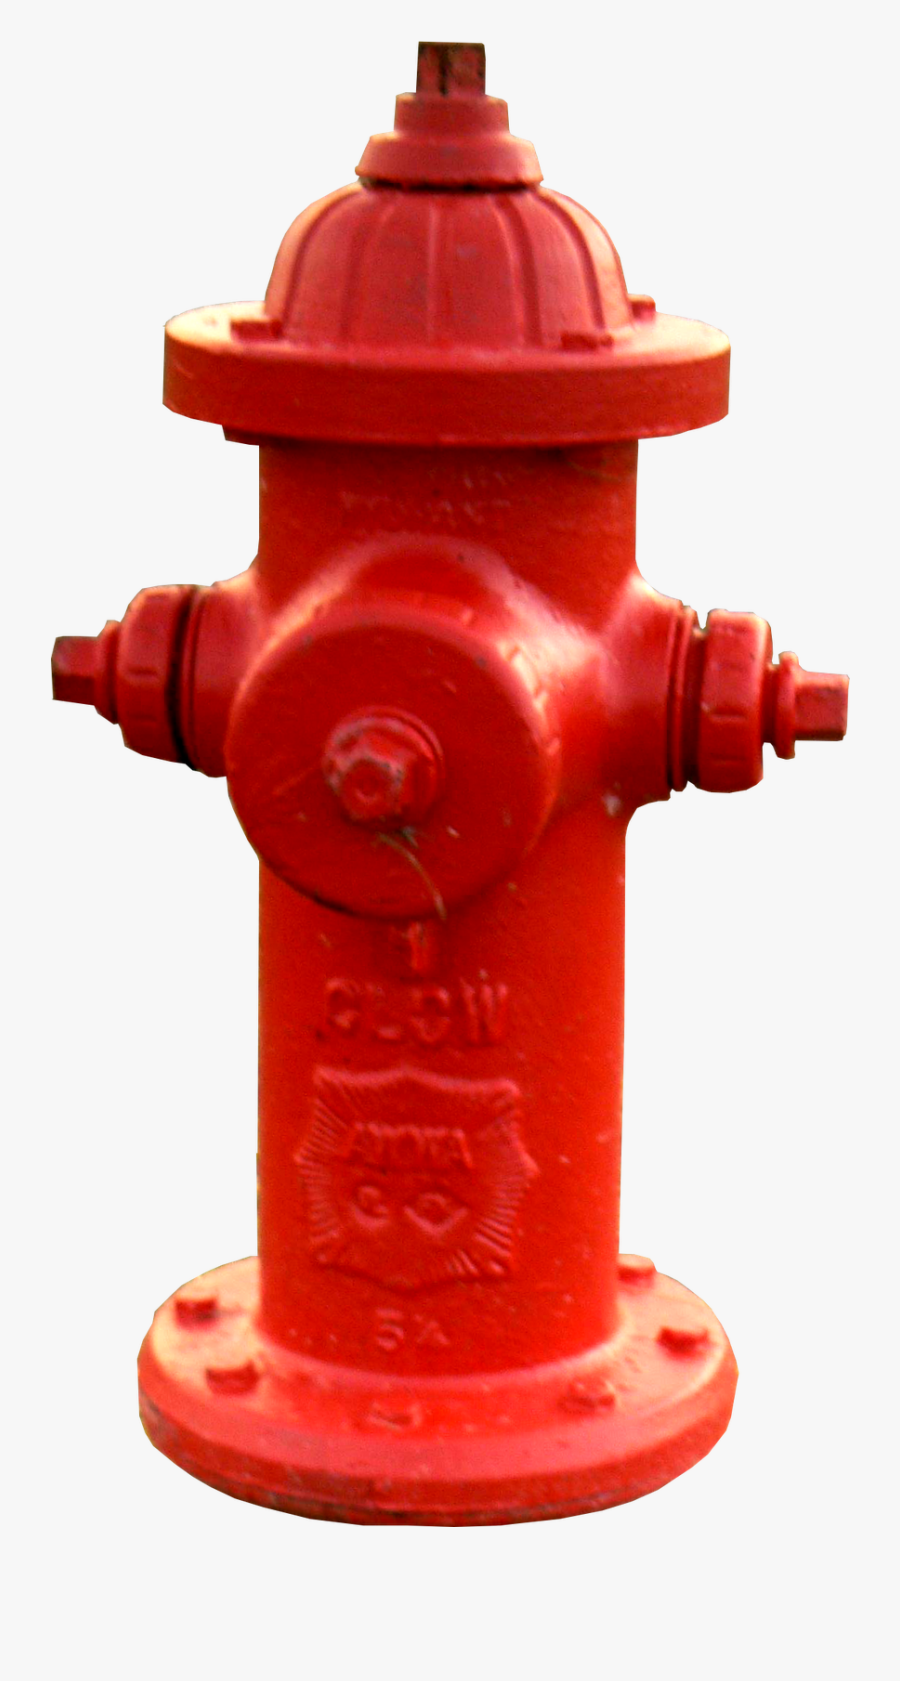 Fire Hydrant - Fire Hydrant Png, Transparent Clipart